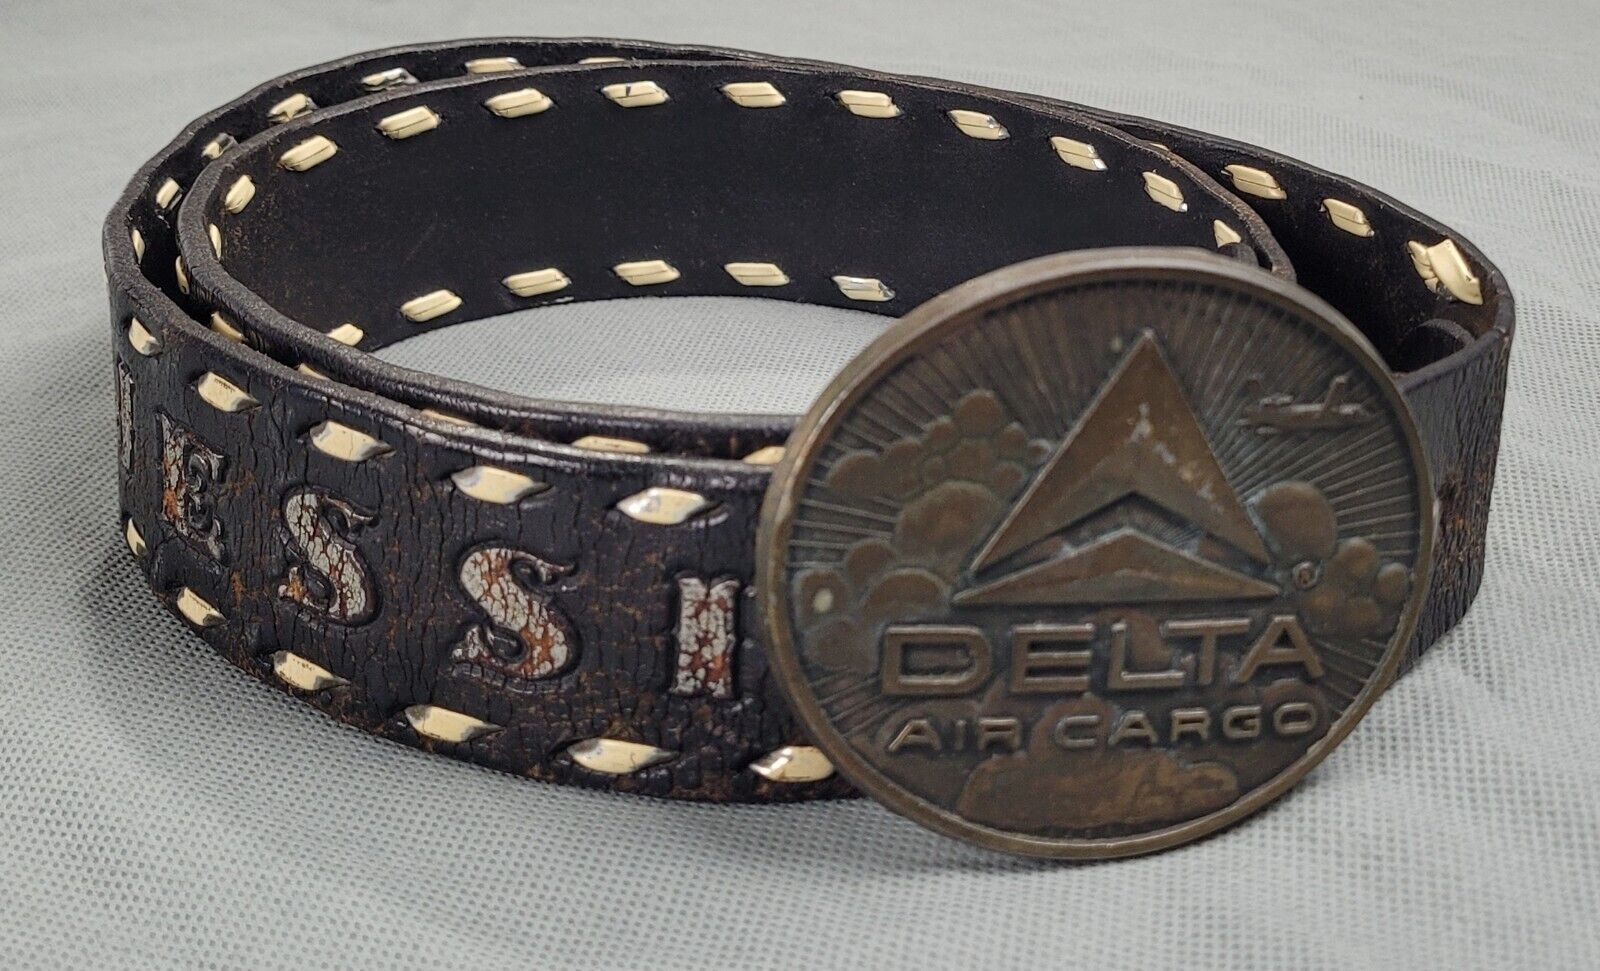 Delta Air Cargo Buckle Stitched Leather Belt